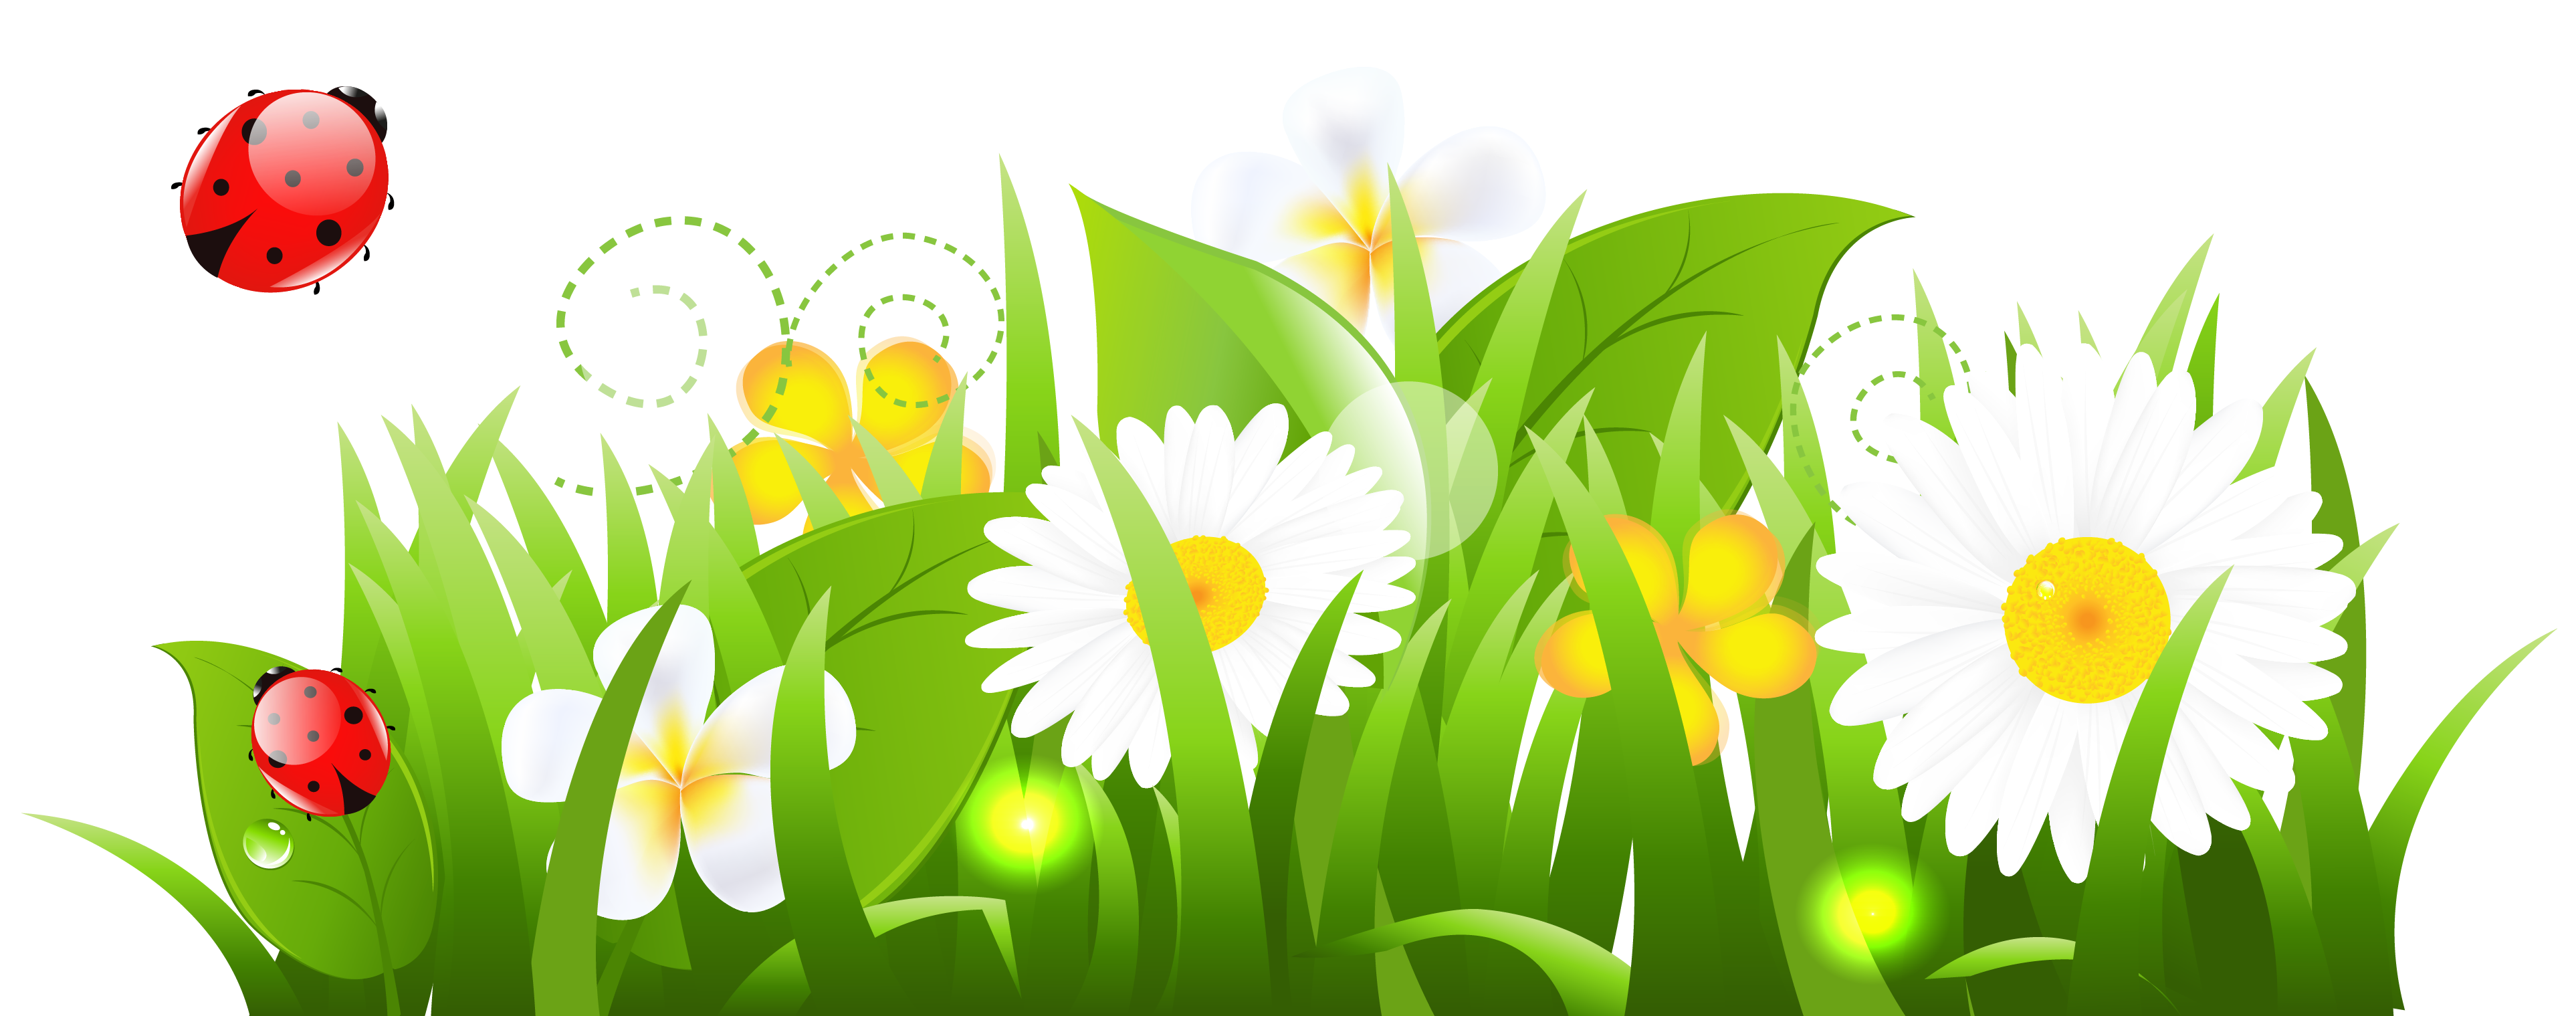 Grass And Flowers Transparent Image Clipart